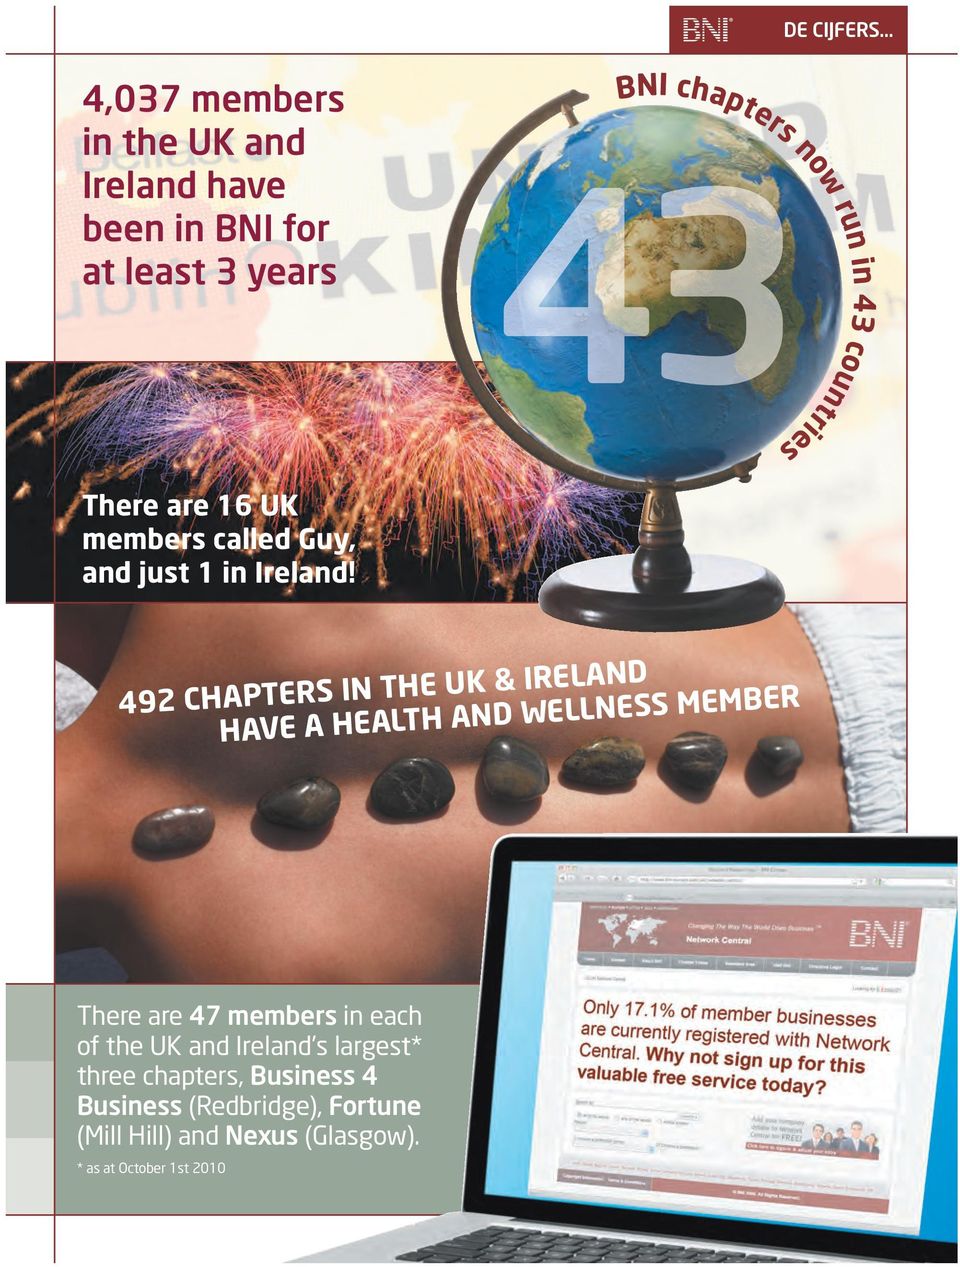 492 chapters in the UK & Ireland have a Health and Wellness member There are 47 members in each of the UK